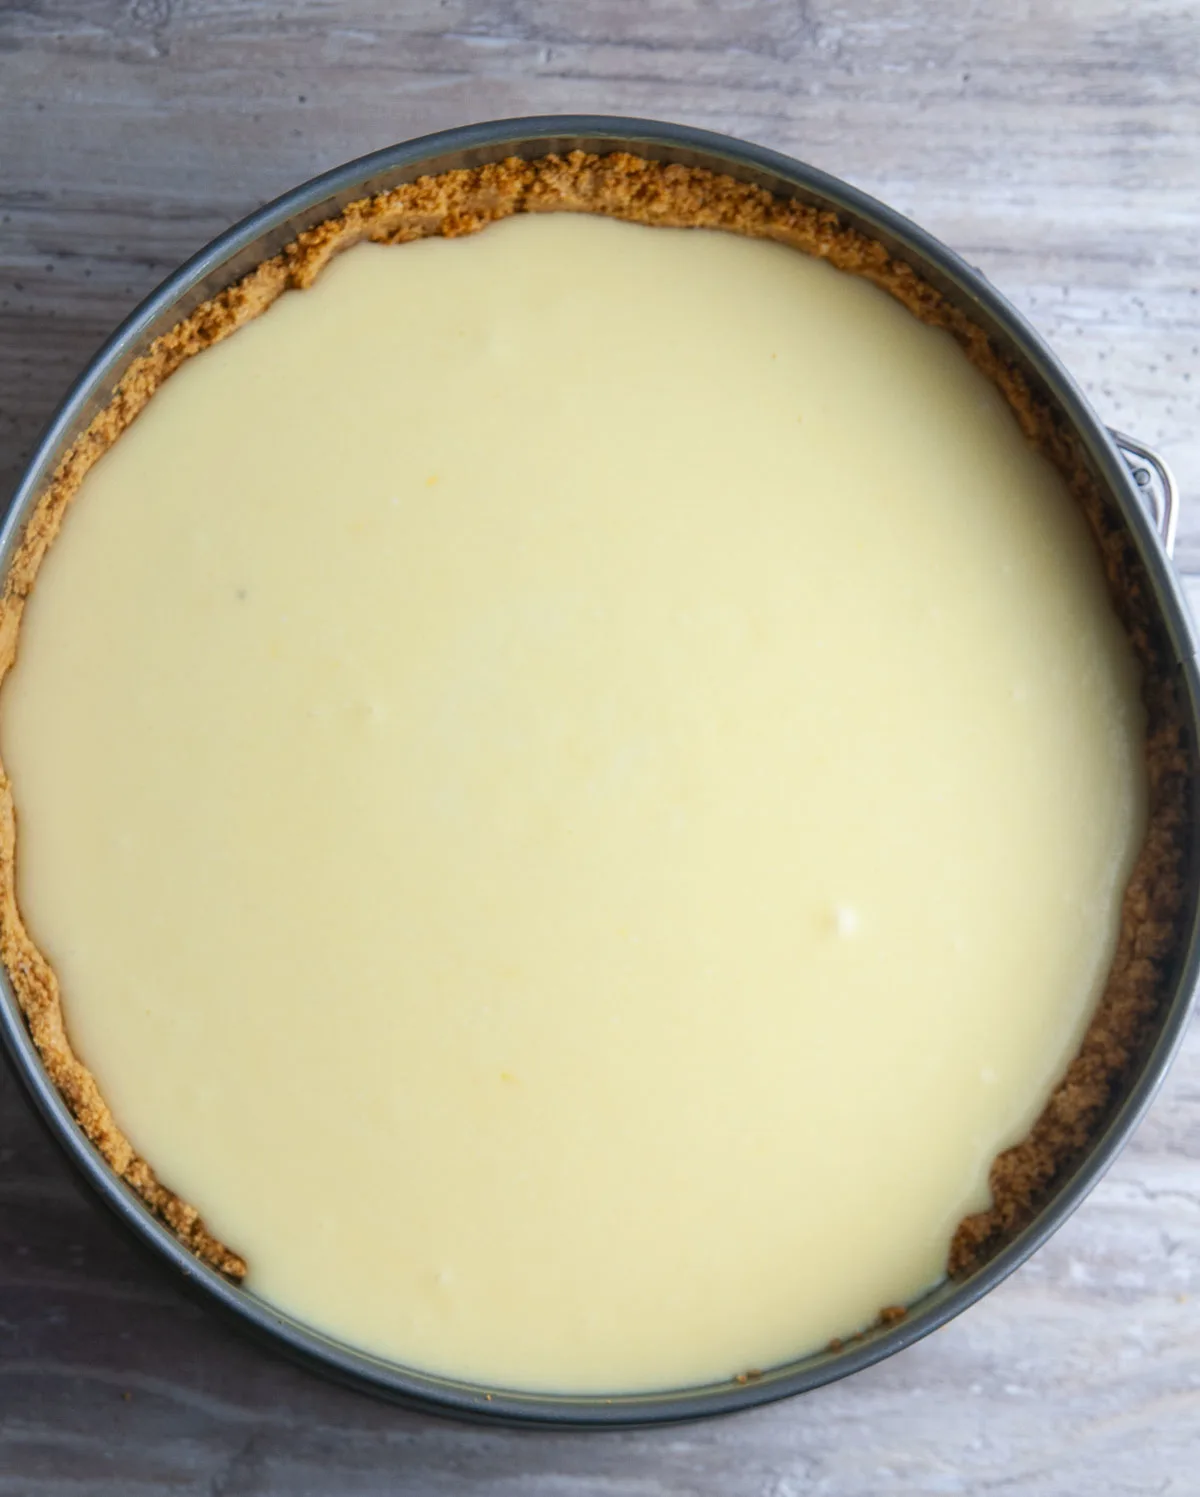 Pour the limoncello cheesecake batter into the crust.